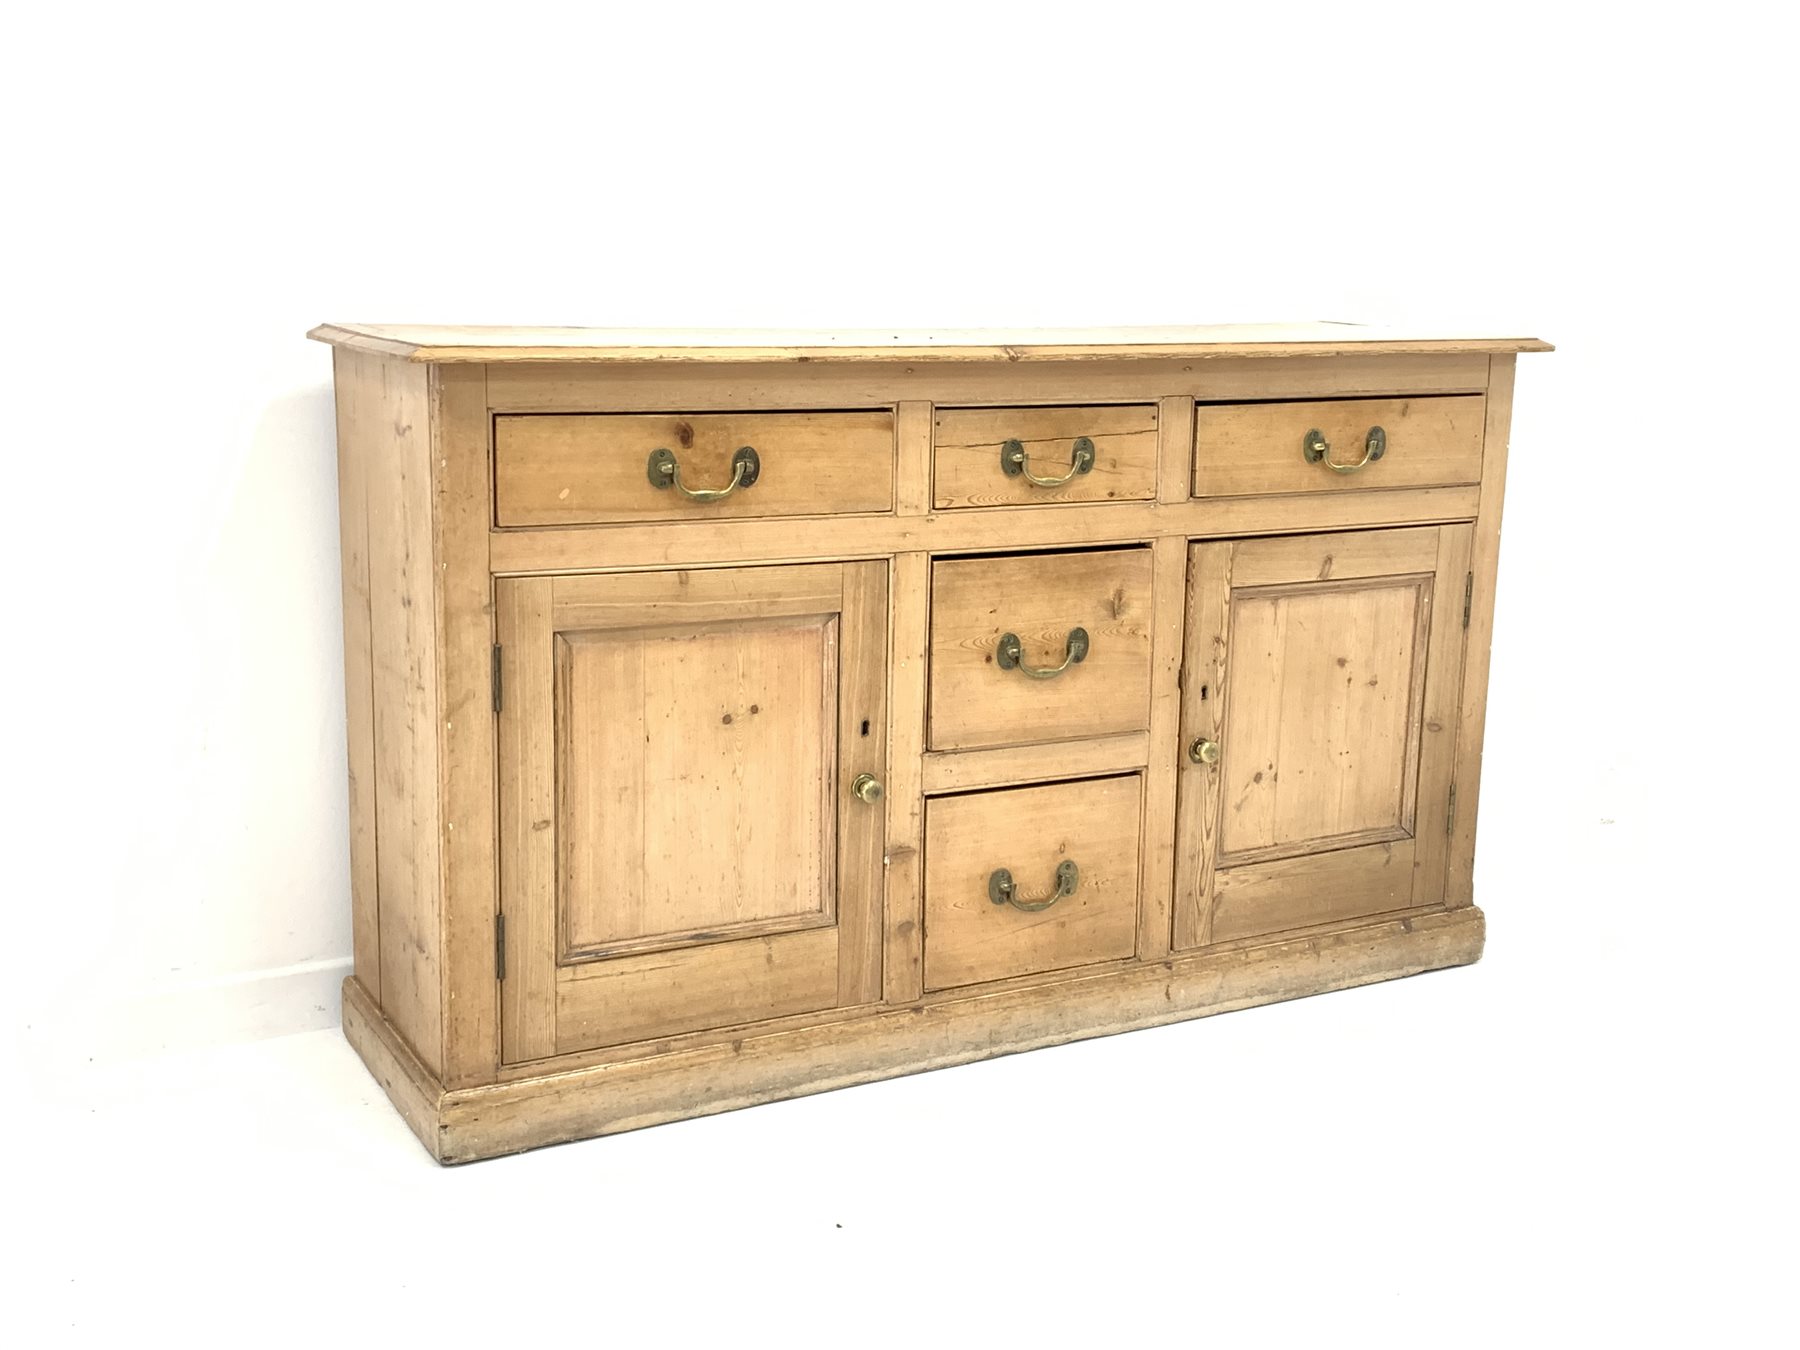 Late 19th century waxed pine dresser base, with five drawers and two panelled cupboards enclosing s